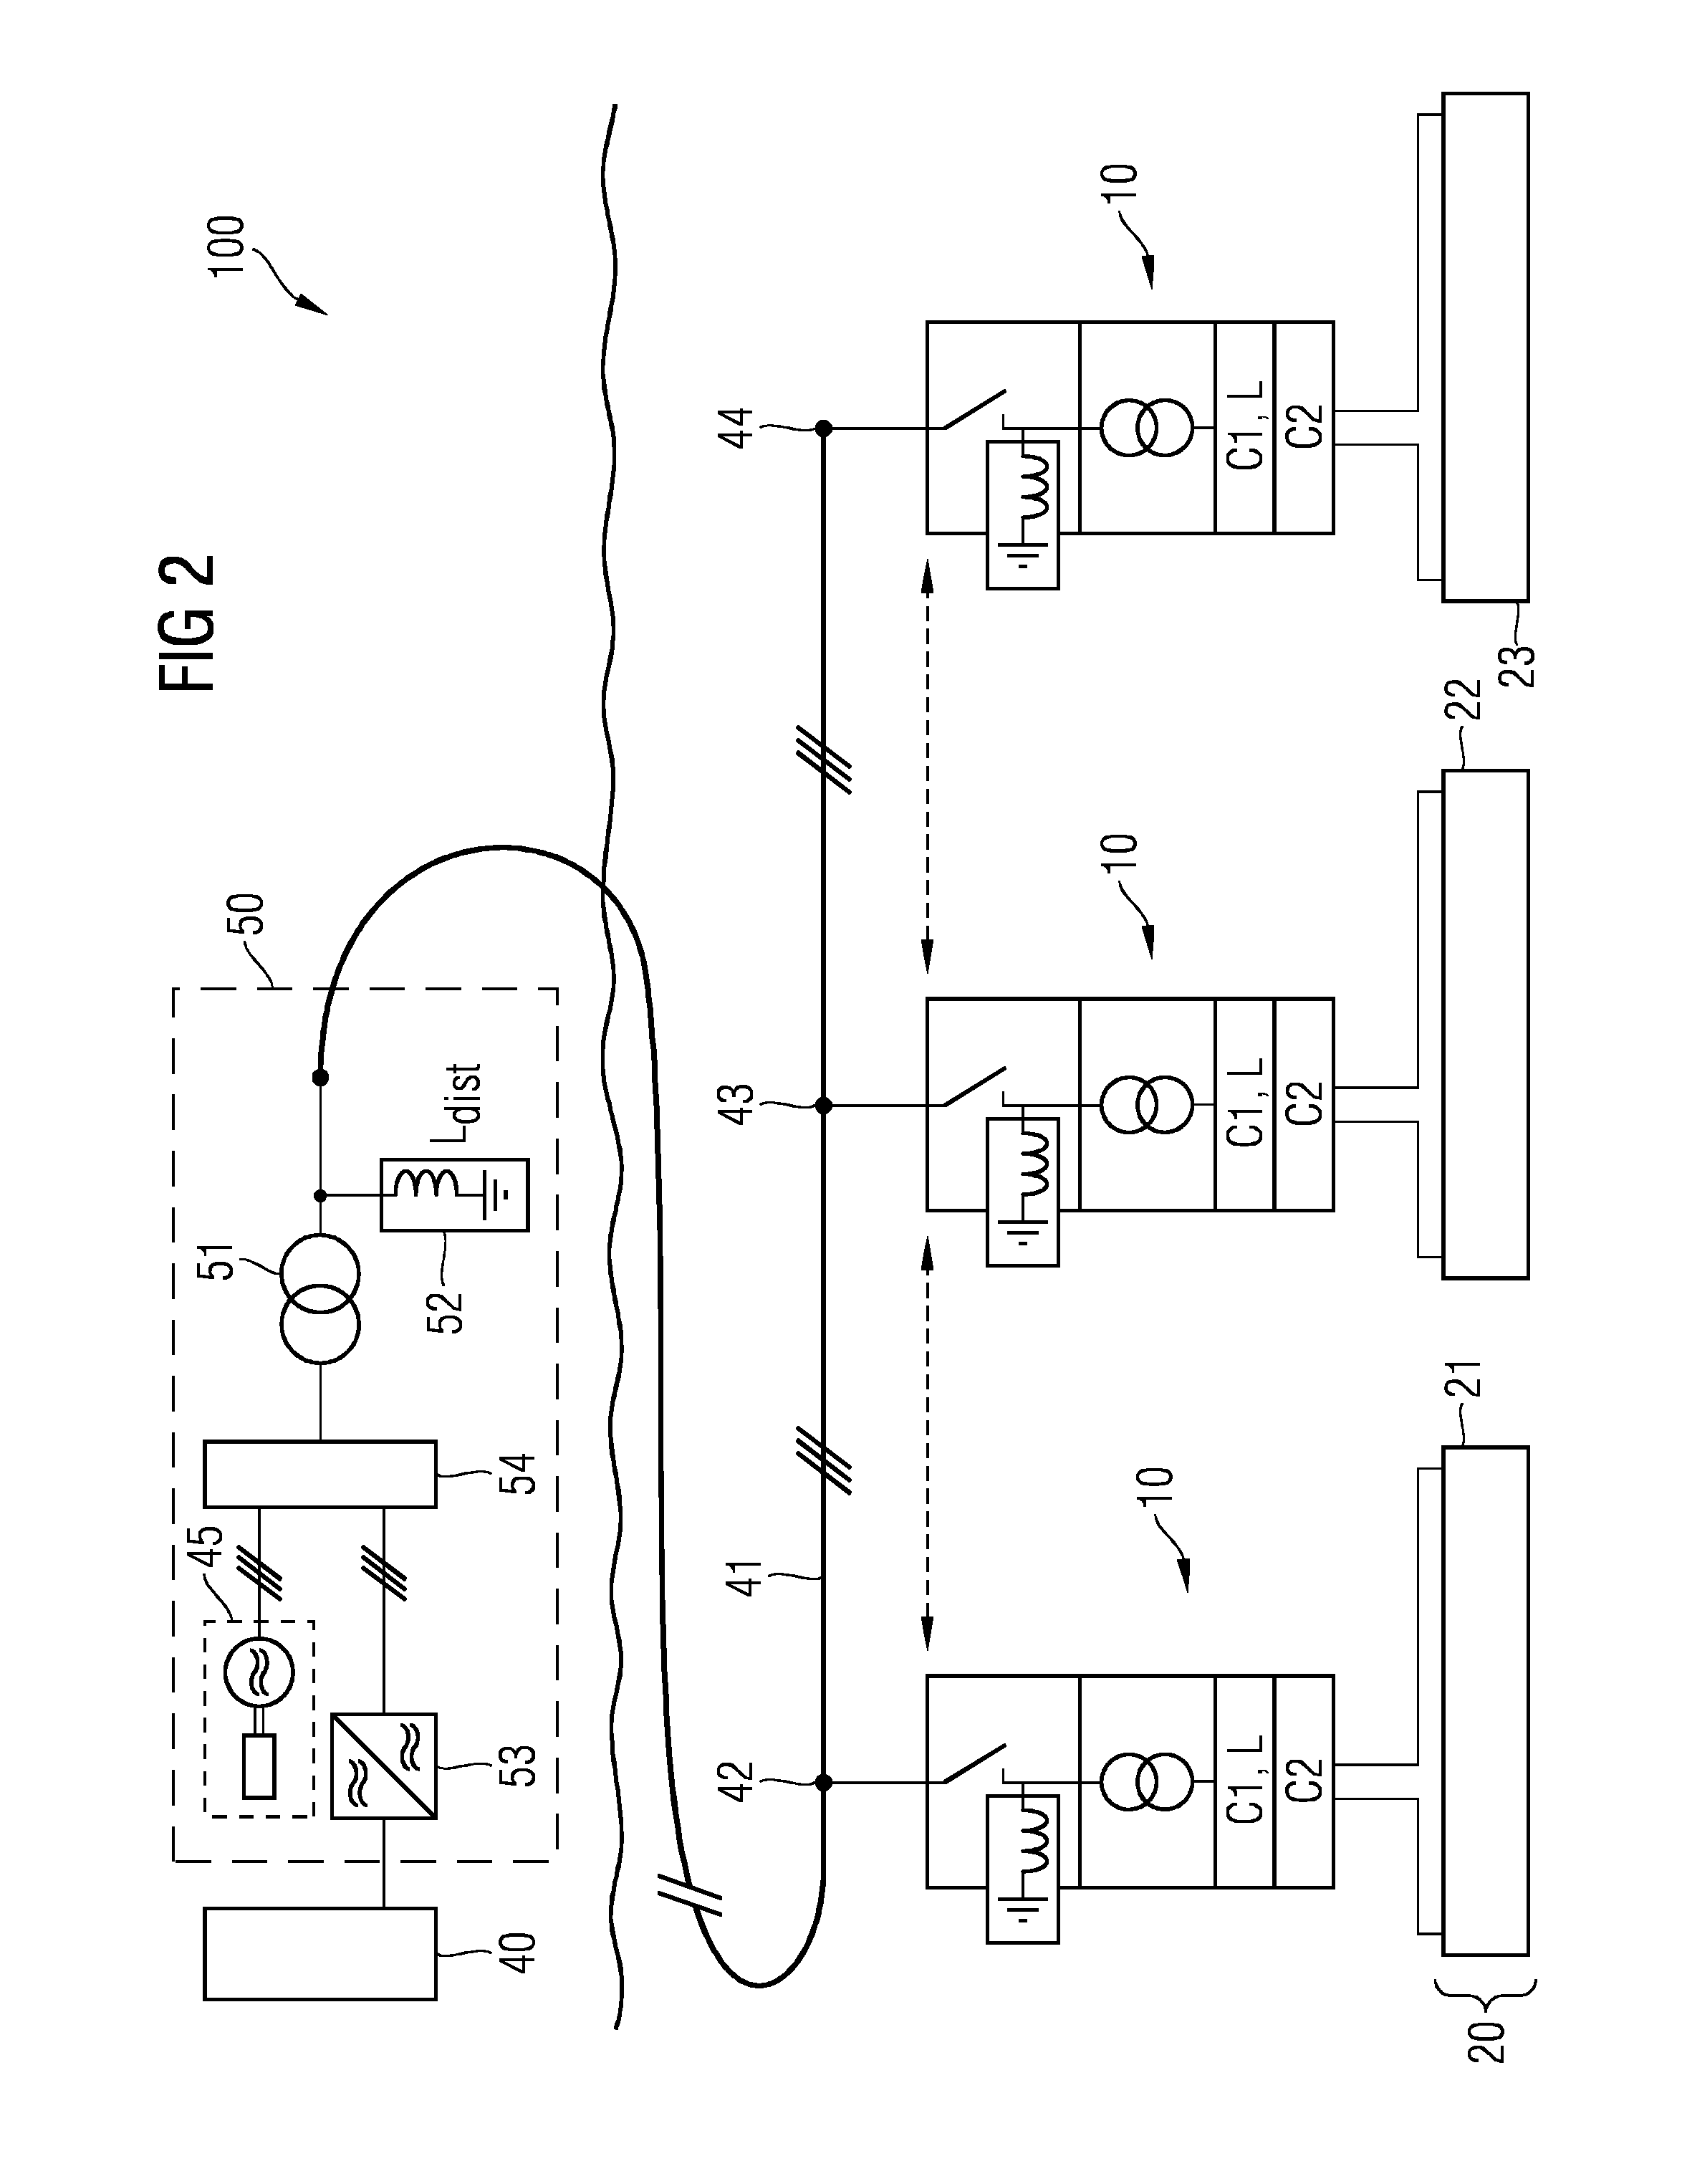 Direct Electric Heating System for Heating a Subsea Pipeline